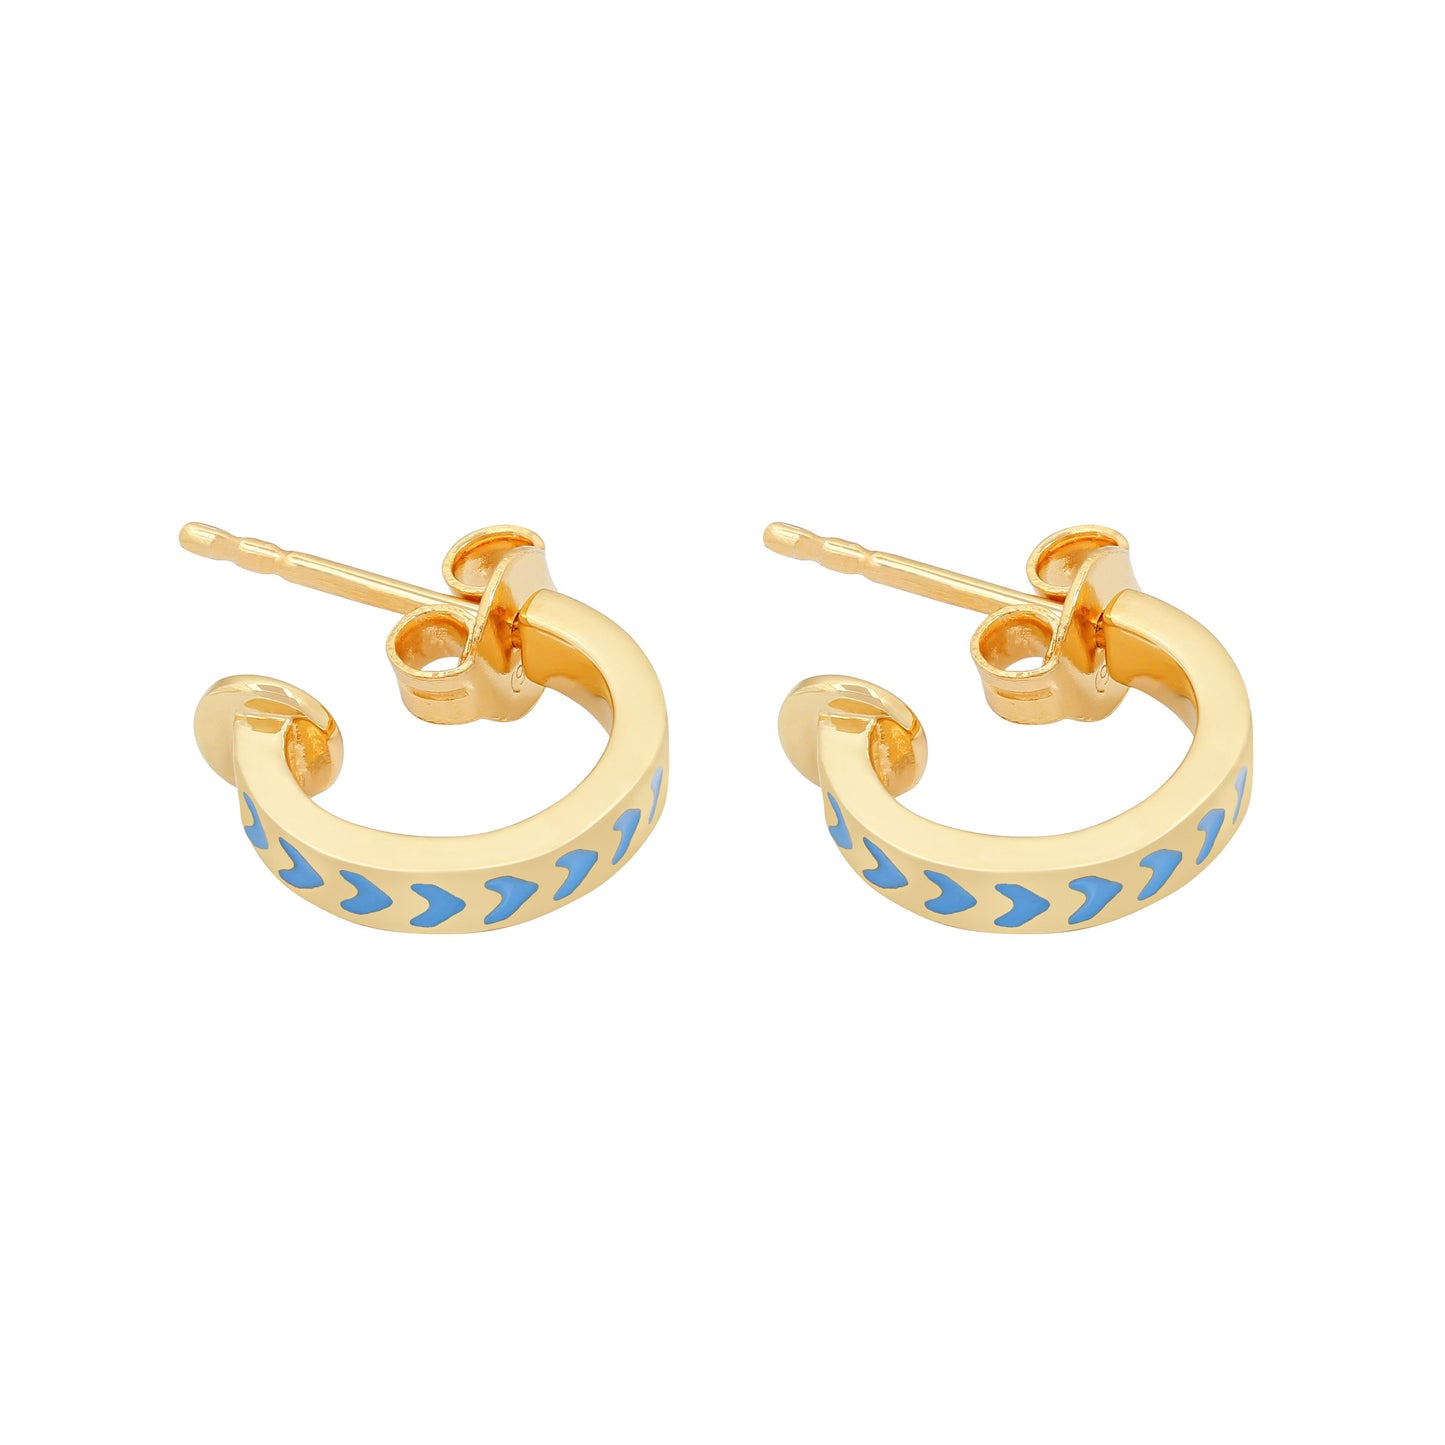 image of spark hoop enamel earrings in blue and gold on white background